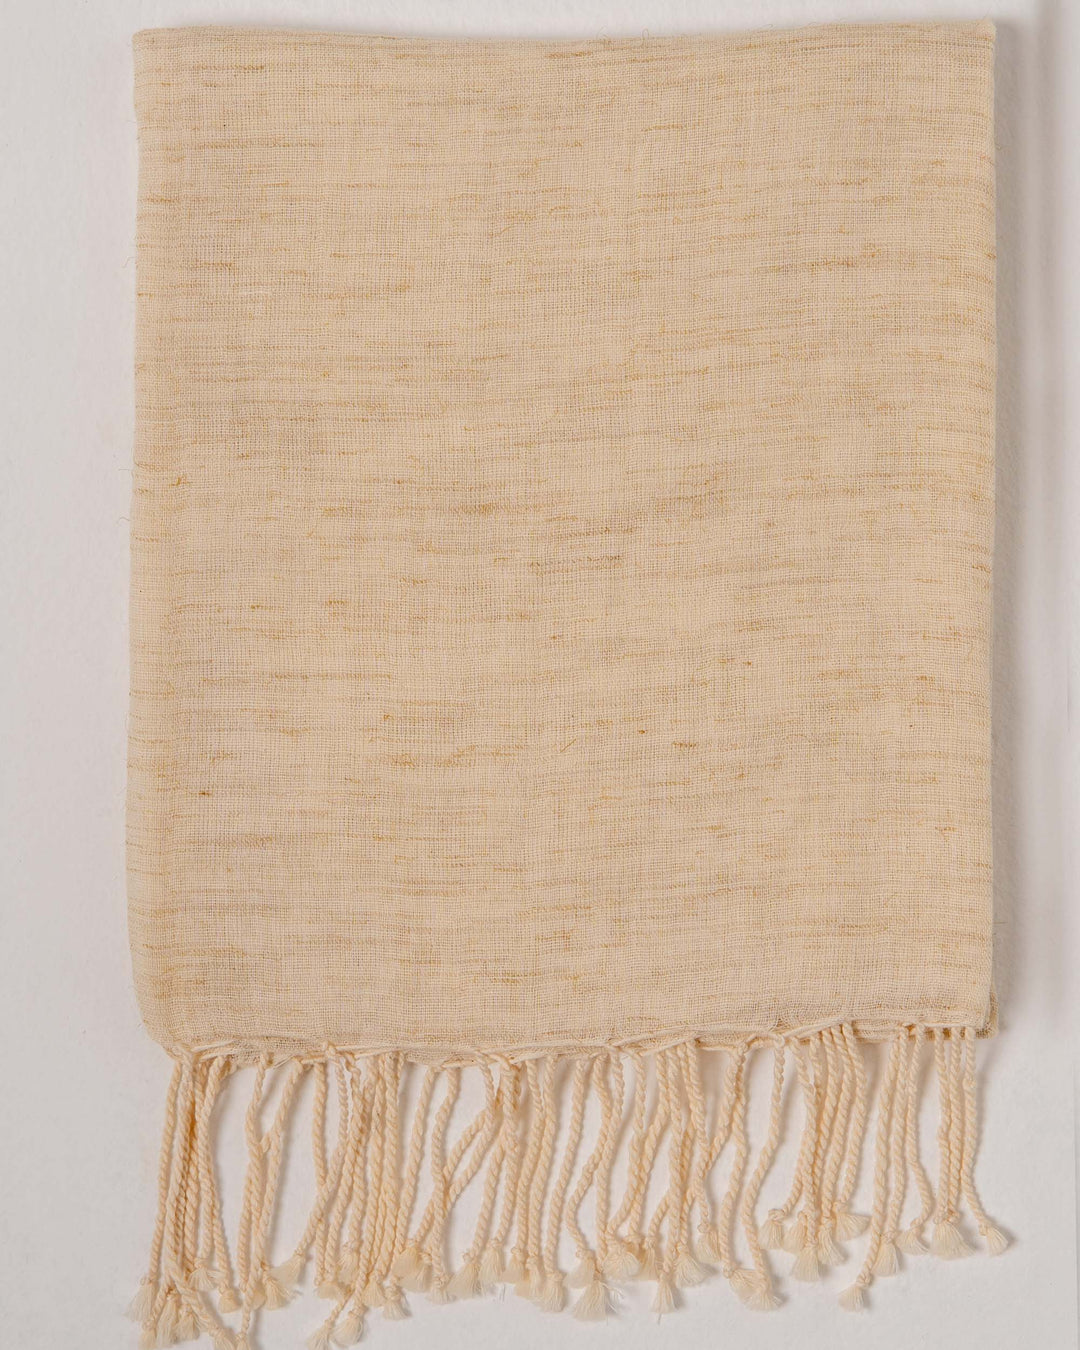 Hand-loomed cotton beach cover